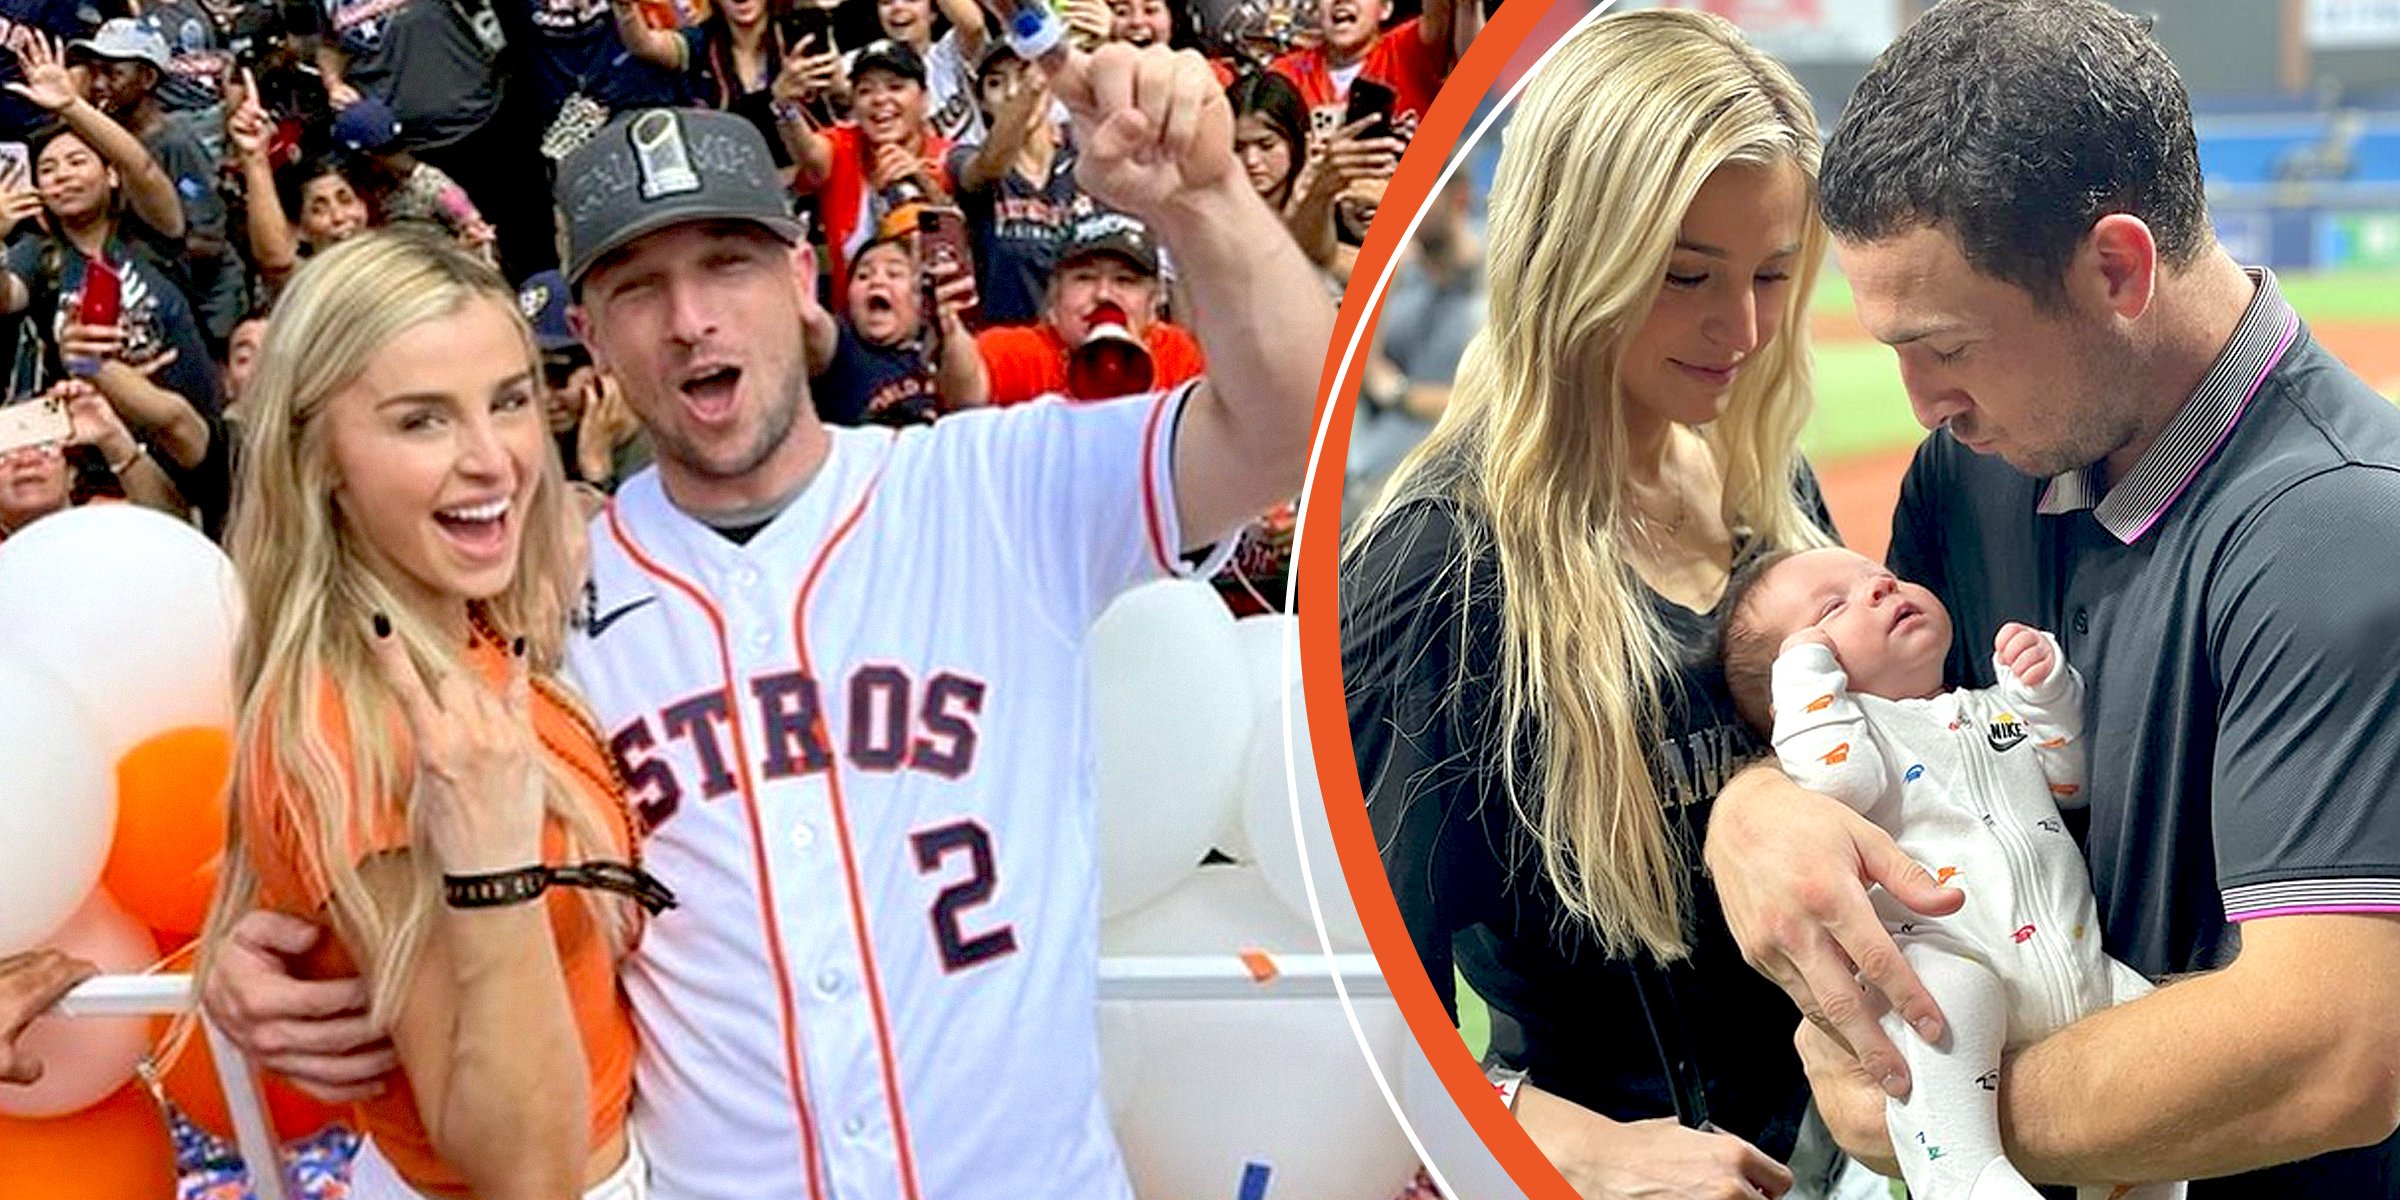 Alex and Reagan Bregman Pose for a Photo in Front of a Large Crowd | Alex and Reagan Bregman Are Photographed While Cradling Their Son Knox Samuel | Source: Instagram/abreg_1